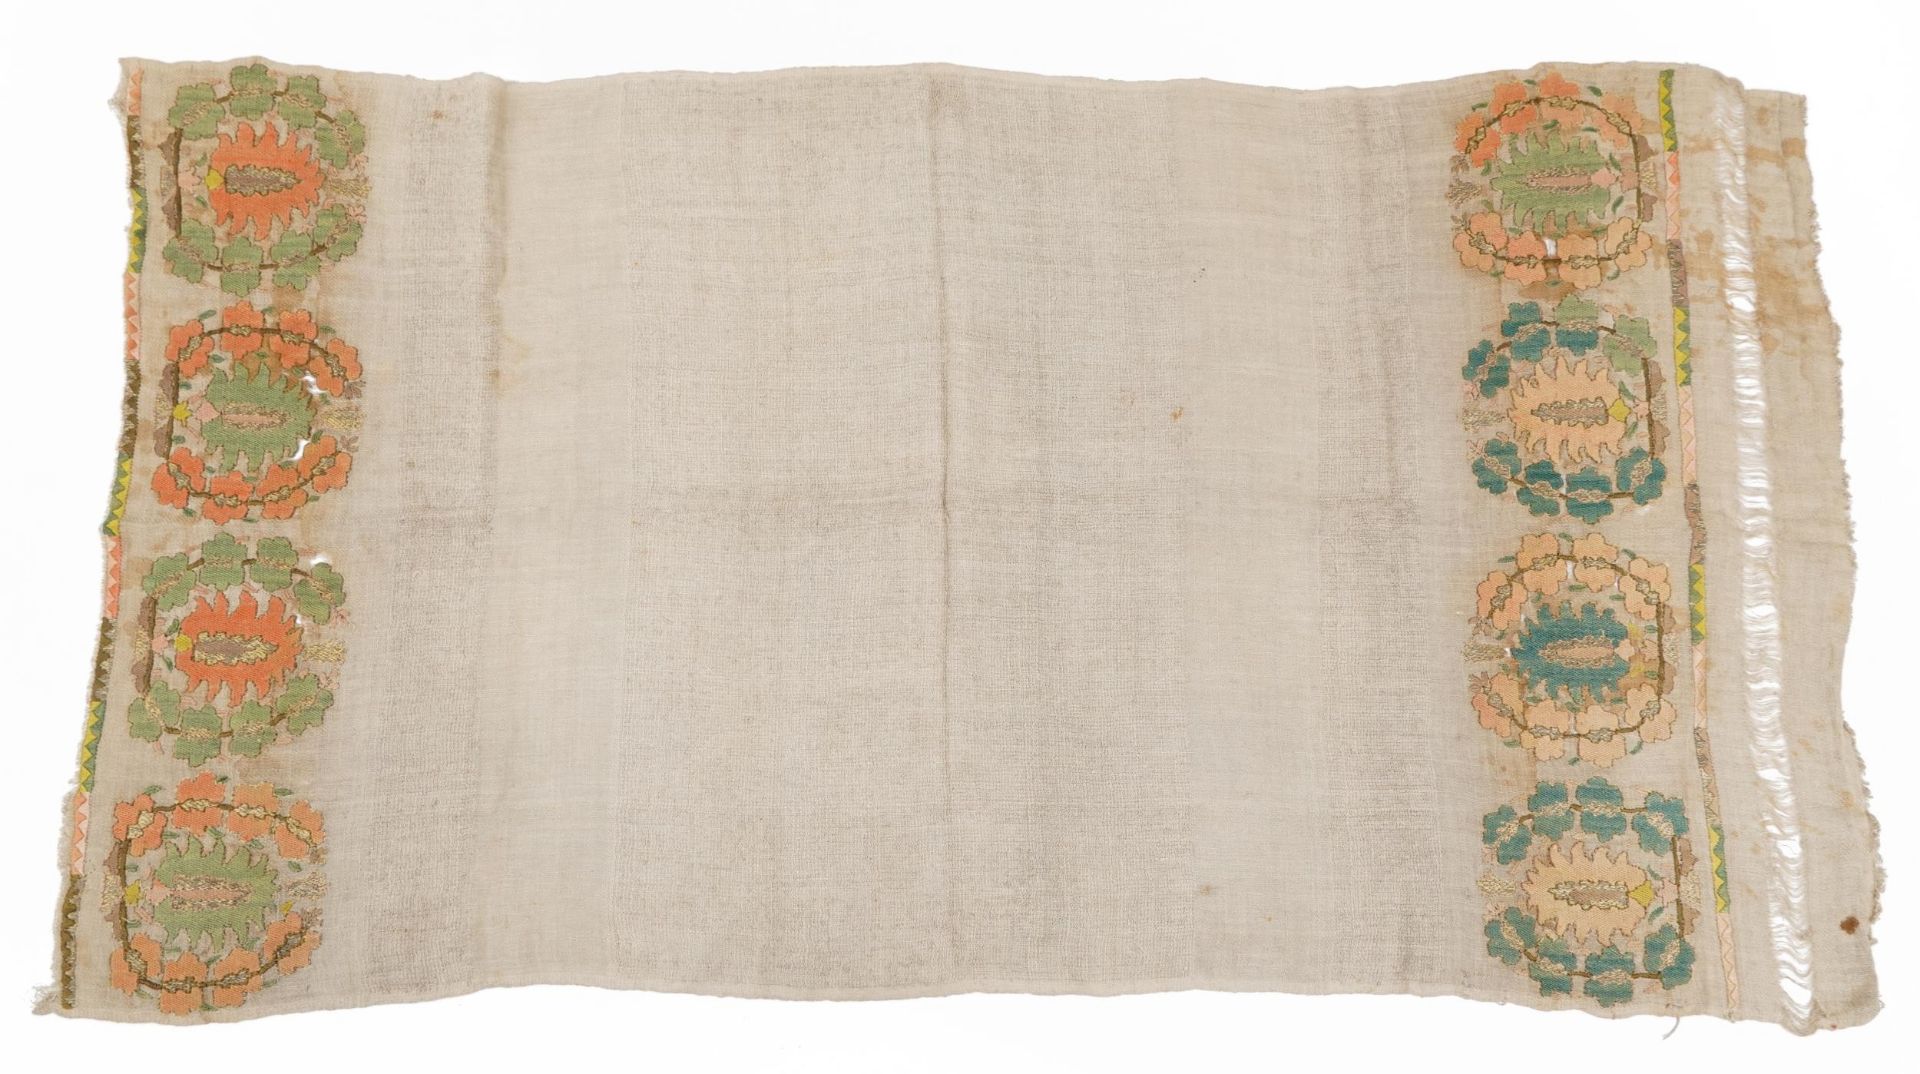 Turkish Ottoman Yaghk cotton and silk textile embroidered with flowers, 130cm x 66cm - Image 2 of 12